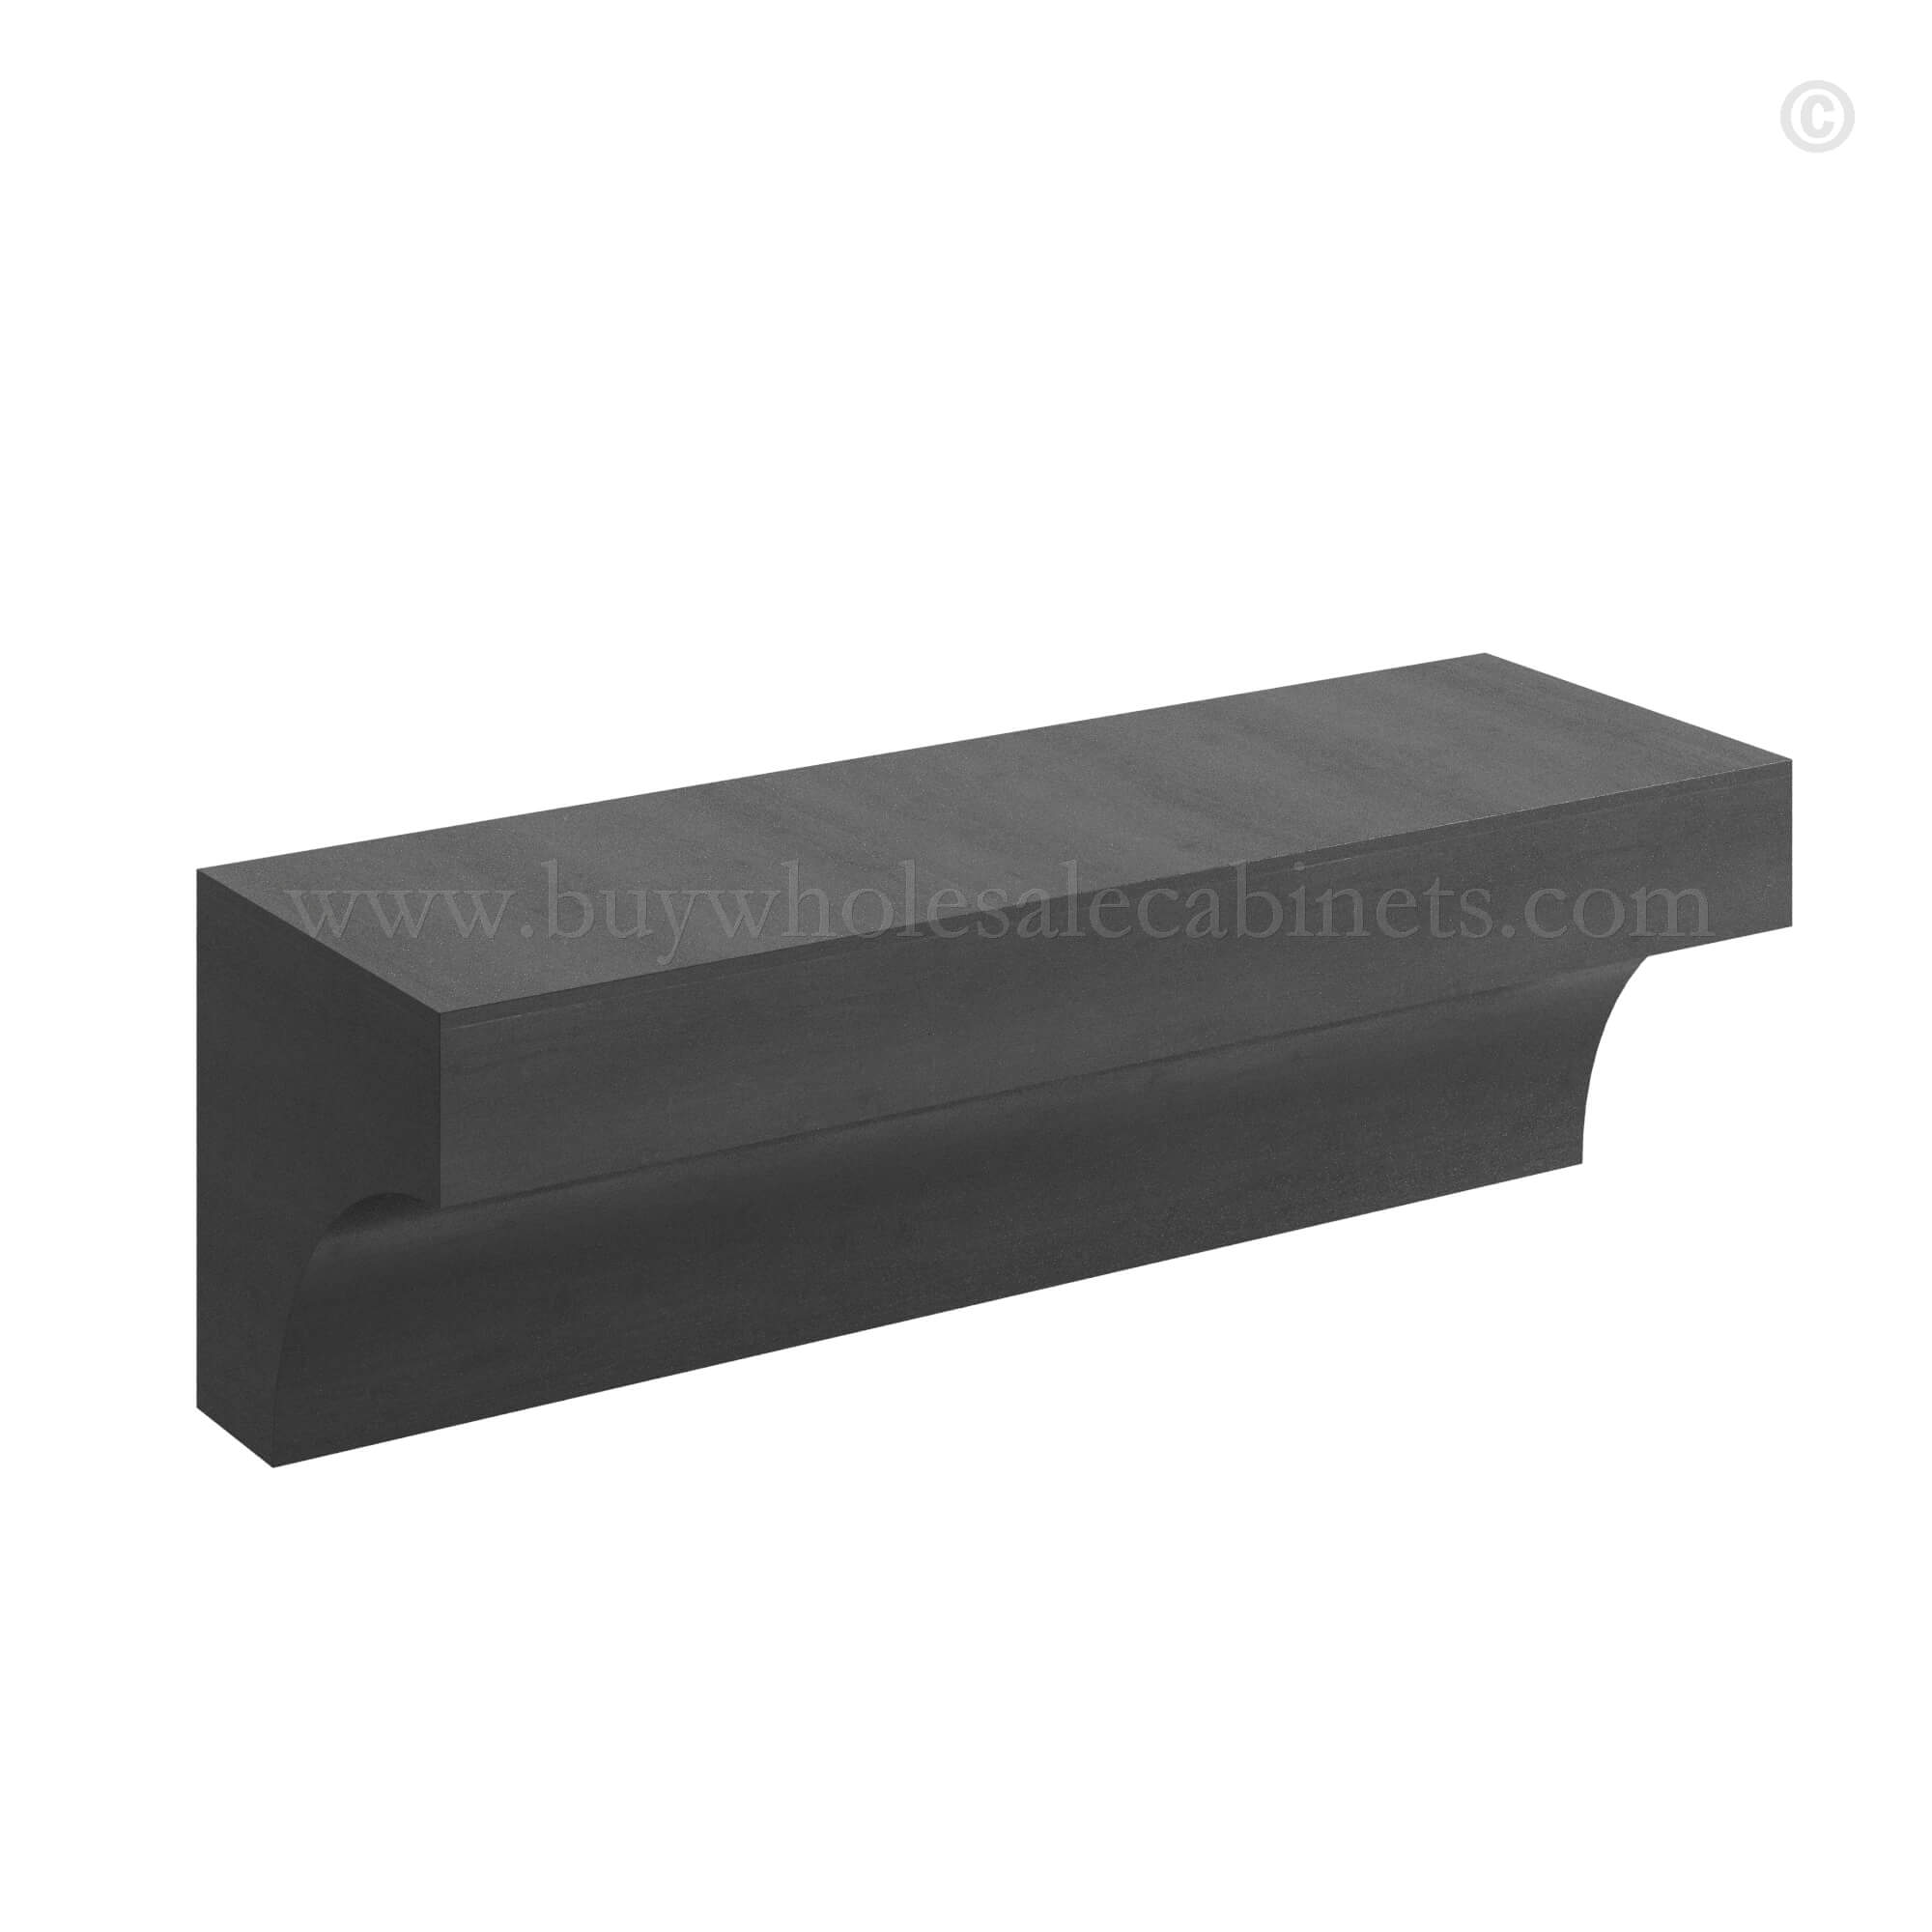 charcoal black shaker cove molding, rta cabinets, wholesale cabinets